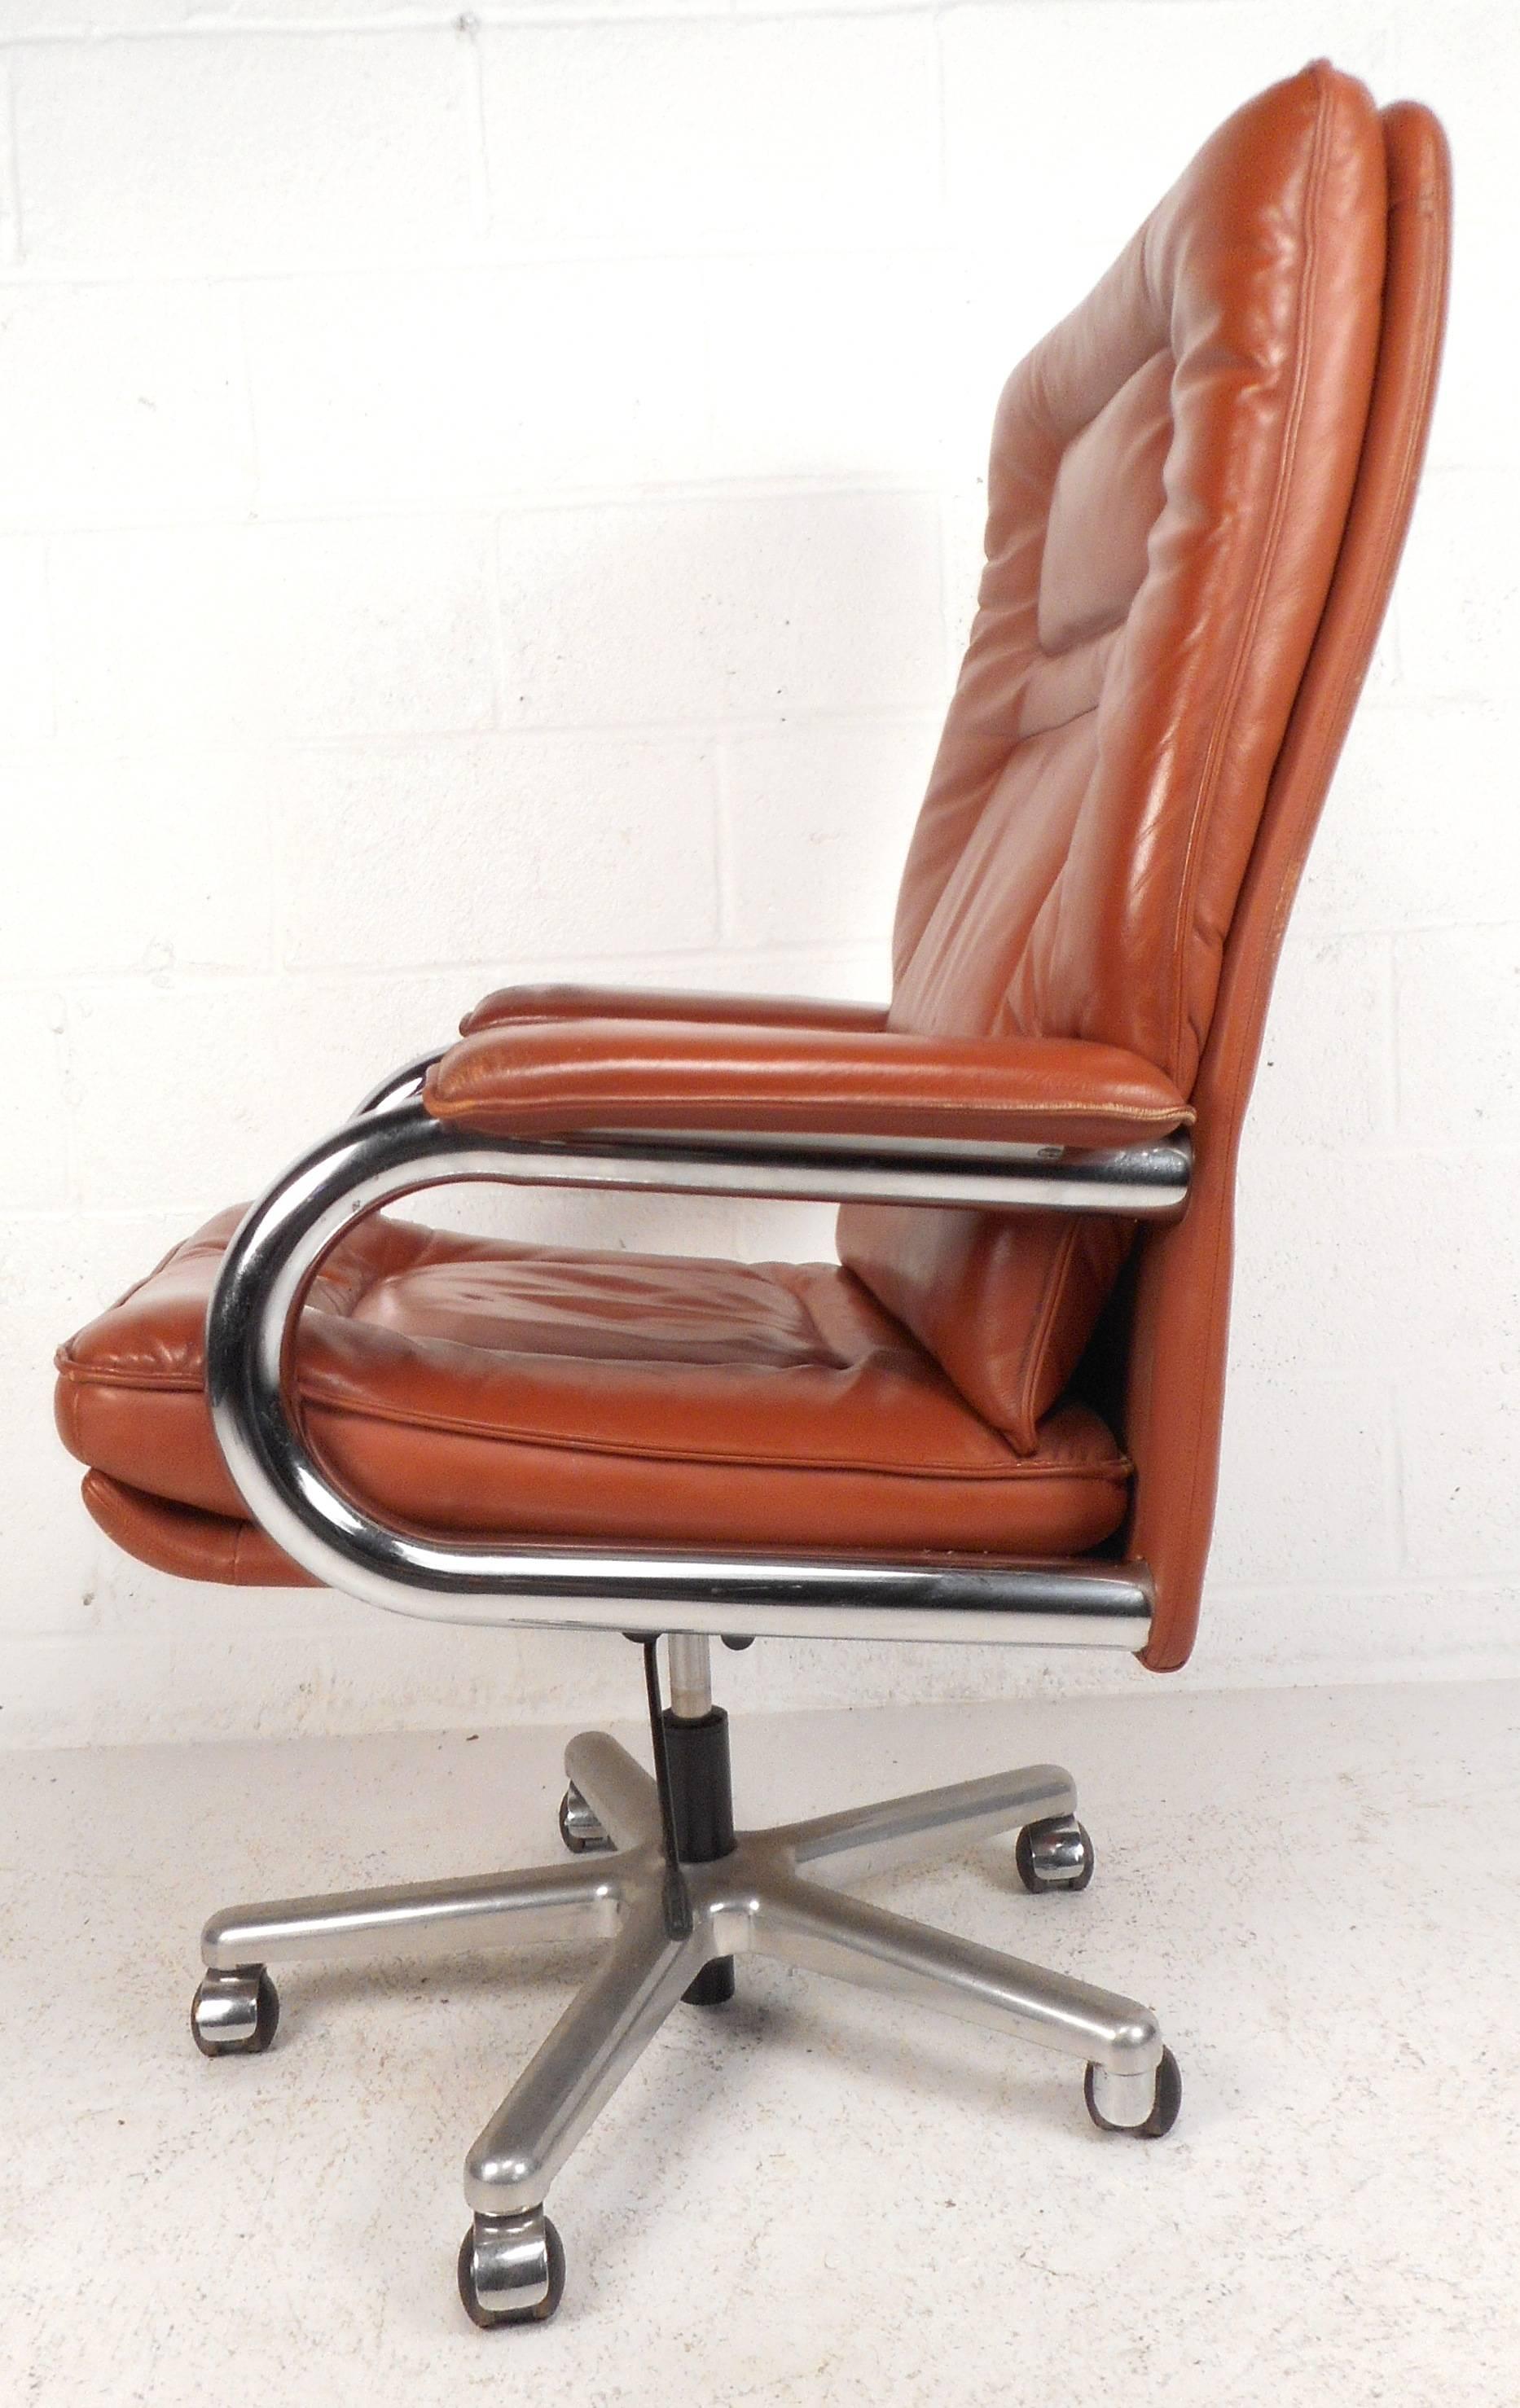 Impressive vintage modern Italian desk chair with tubular chrome sides and leather padded arm rests. Extremely wide and tall seating ensures comfort without sacrificing style. The sleek design offers the ability to swivel and is covered in beautiful